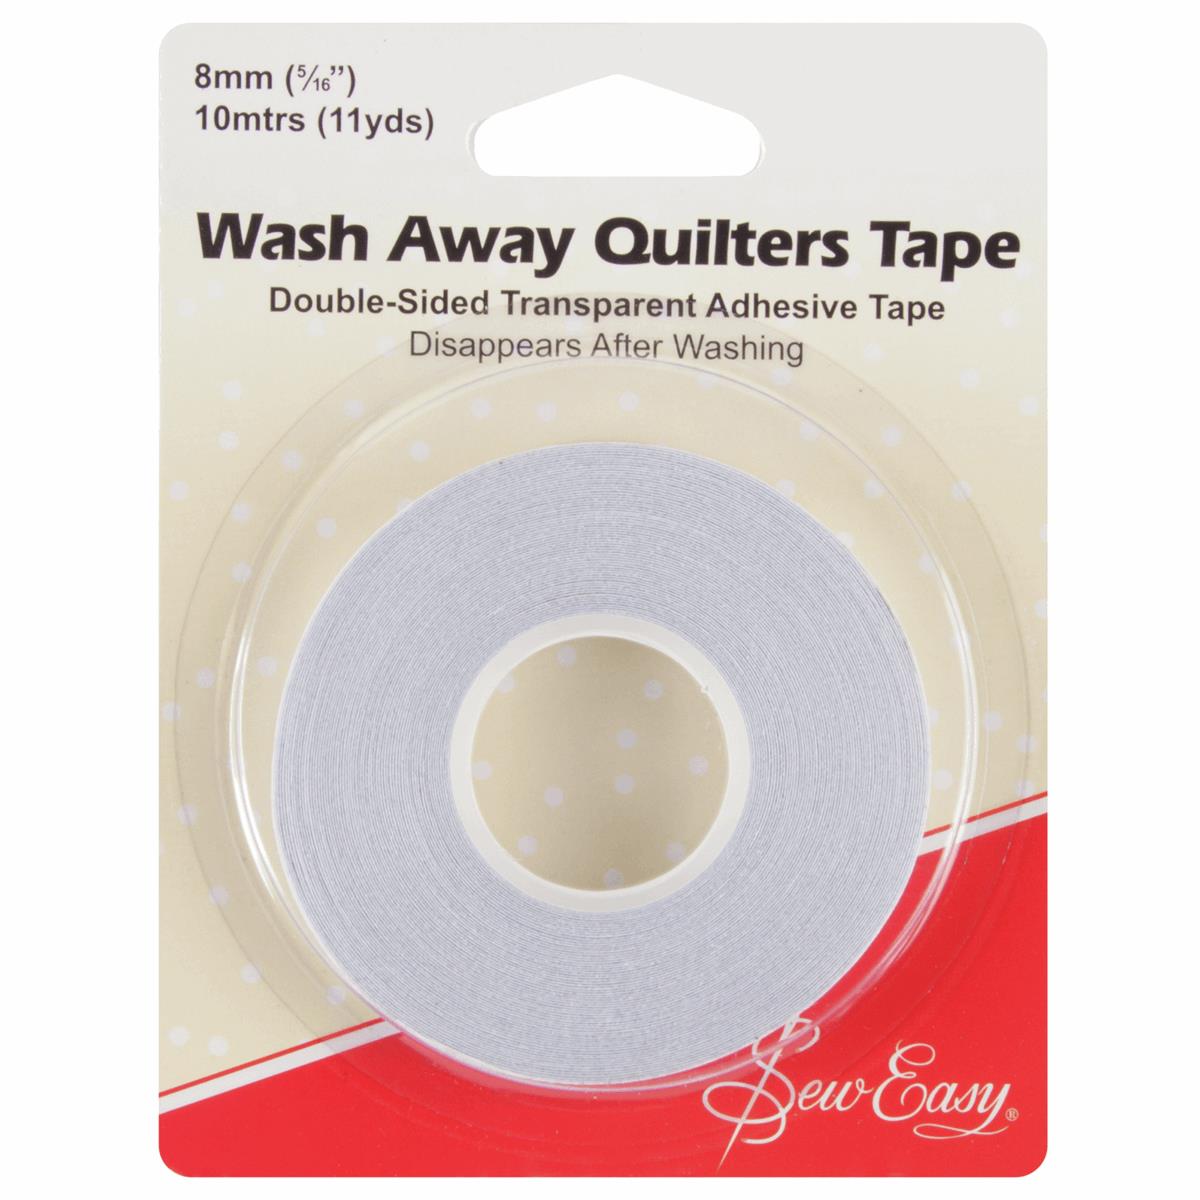 Sew Easy Wash Away Quilters Tape 10m x 8mm | SewingStreet